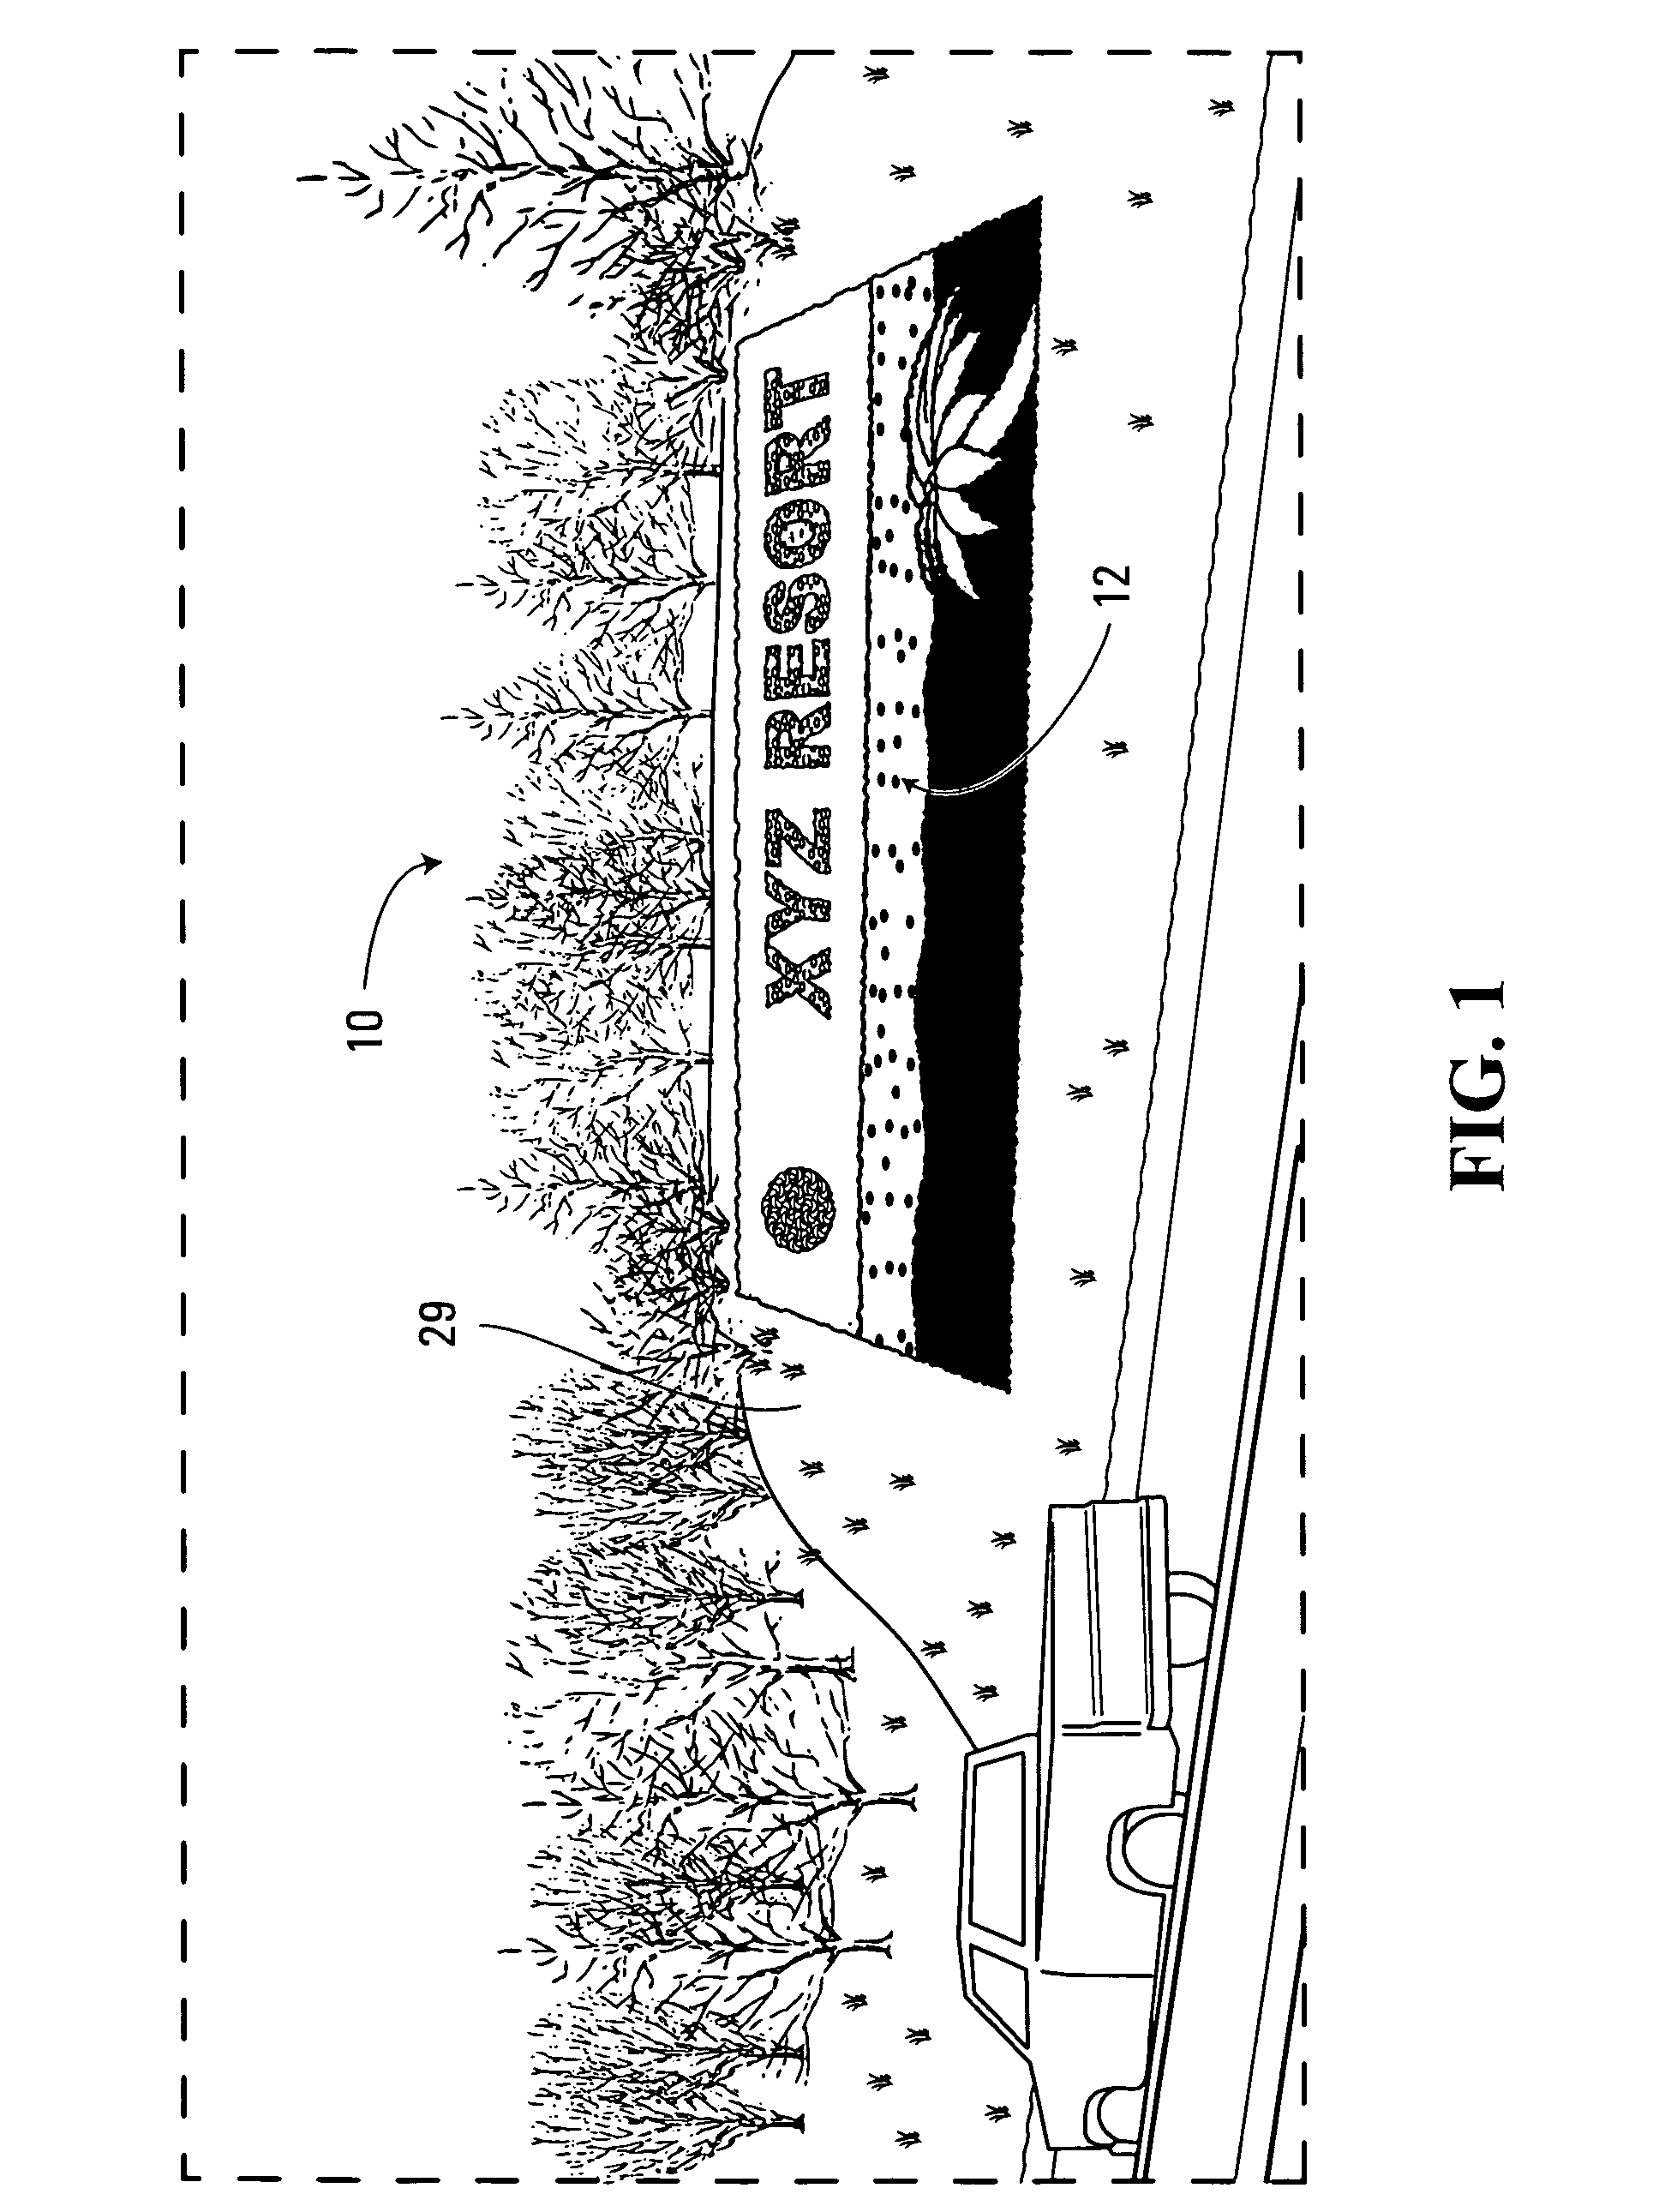 Floral arrangement rendering an image and applications thereof